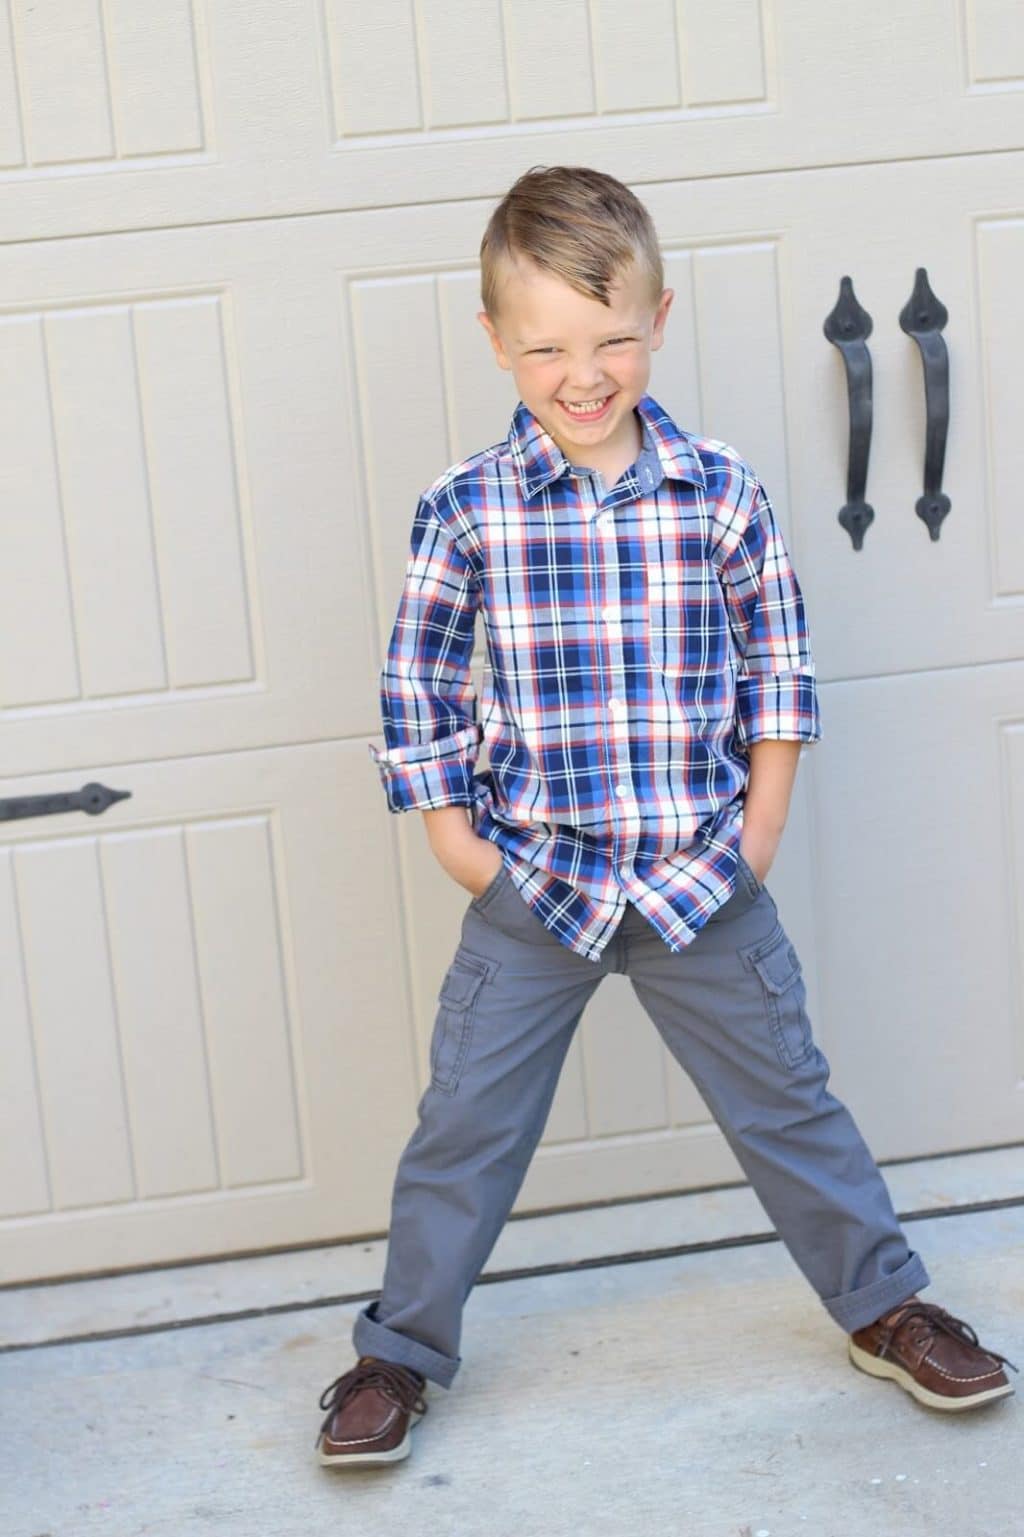 Best back to school clothing for boys